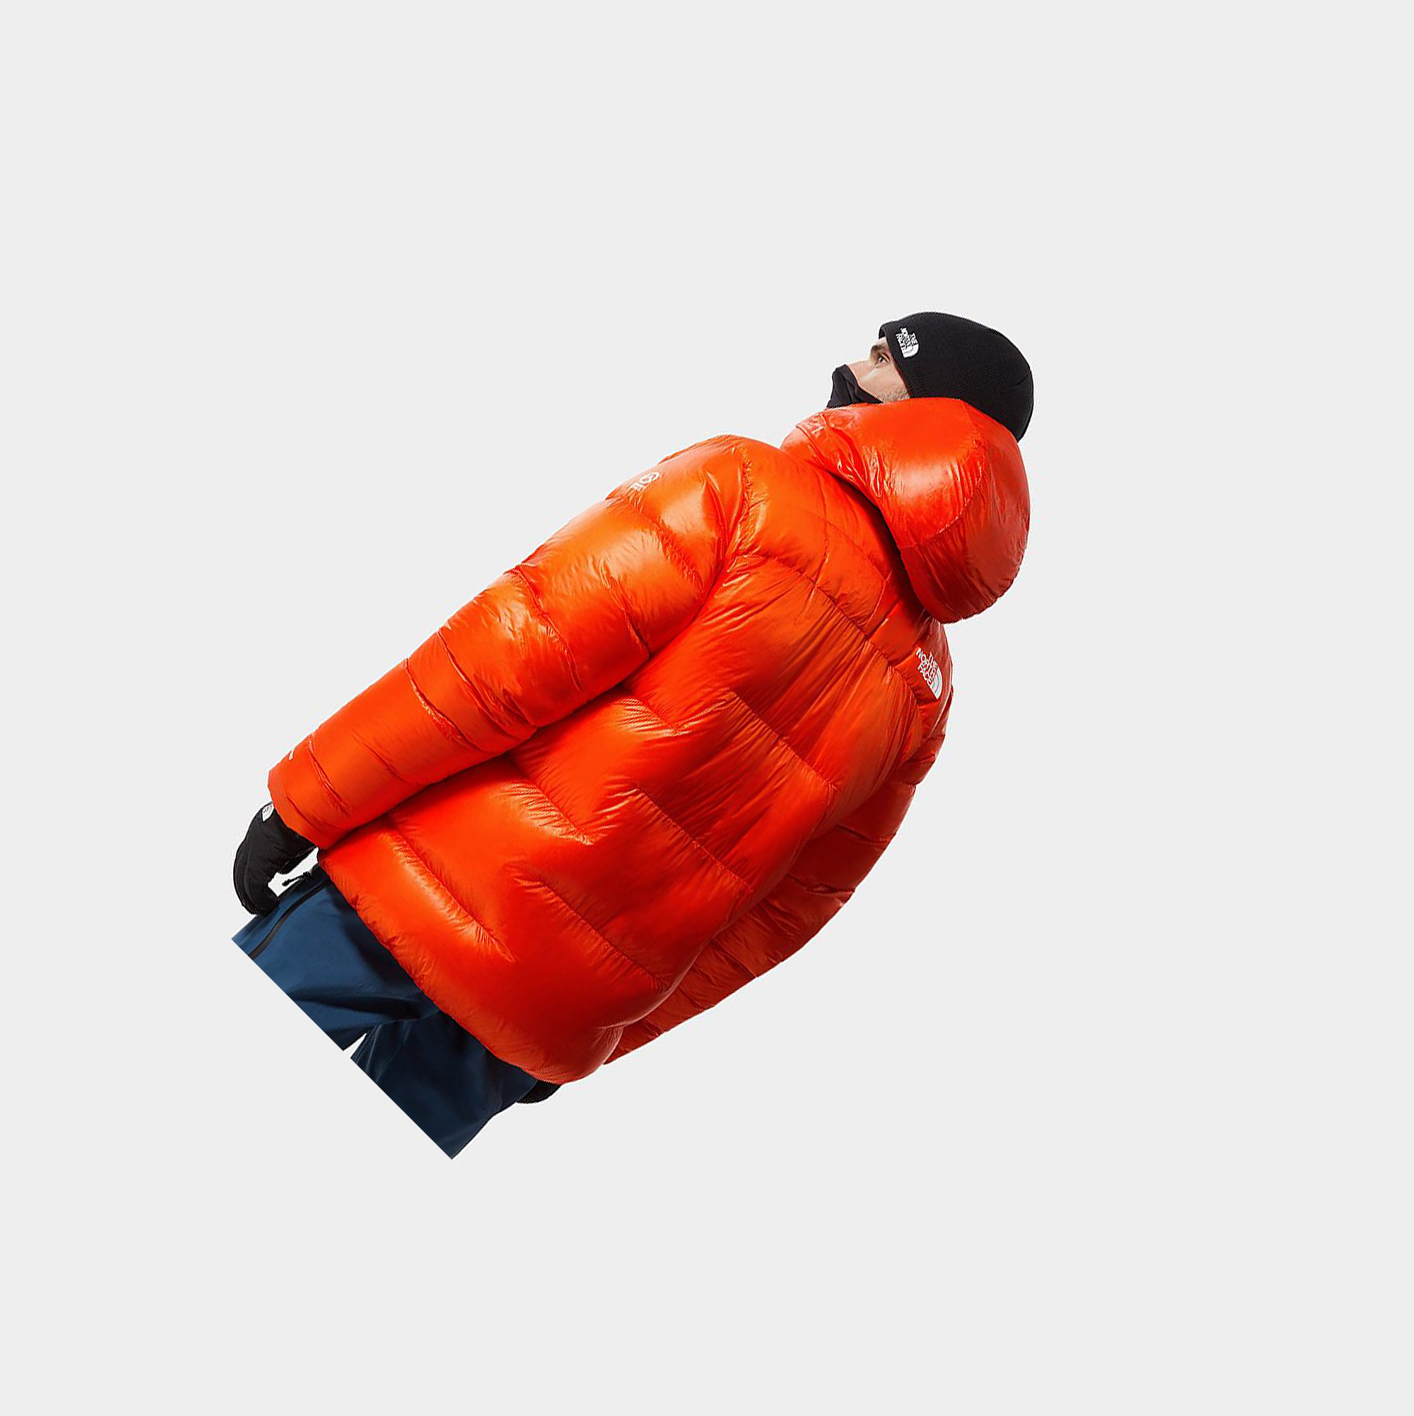 Men's The North Face Summit L6 Cloud DOWN Down Jackets Red Orange | US876BAYN